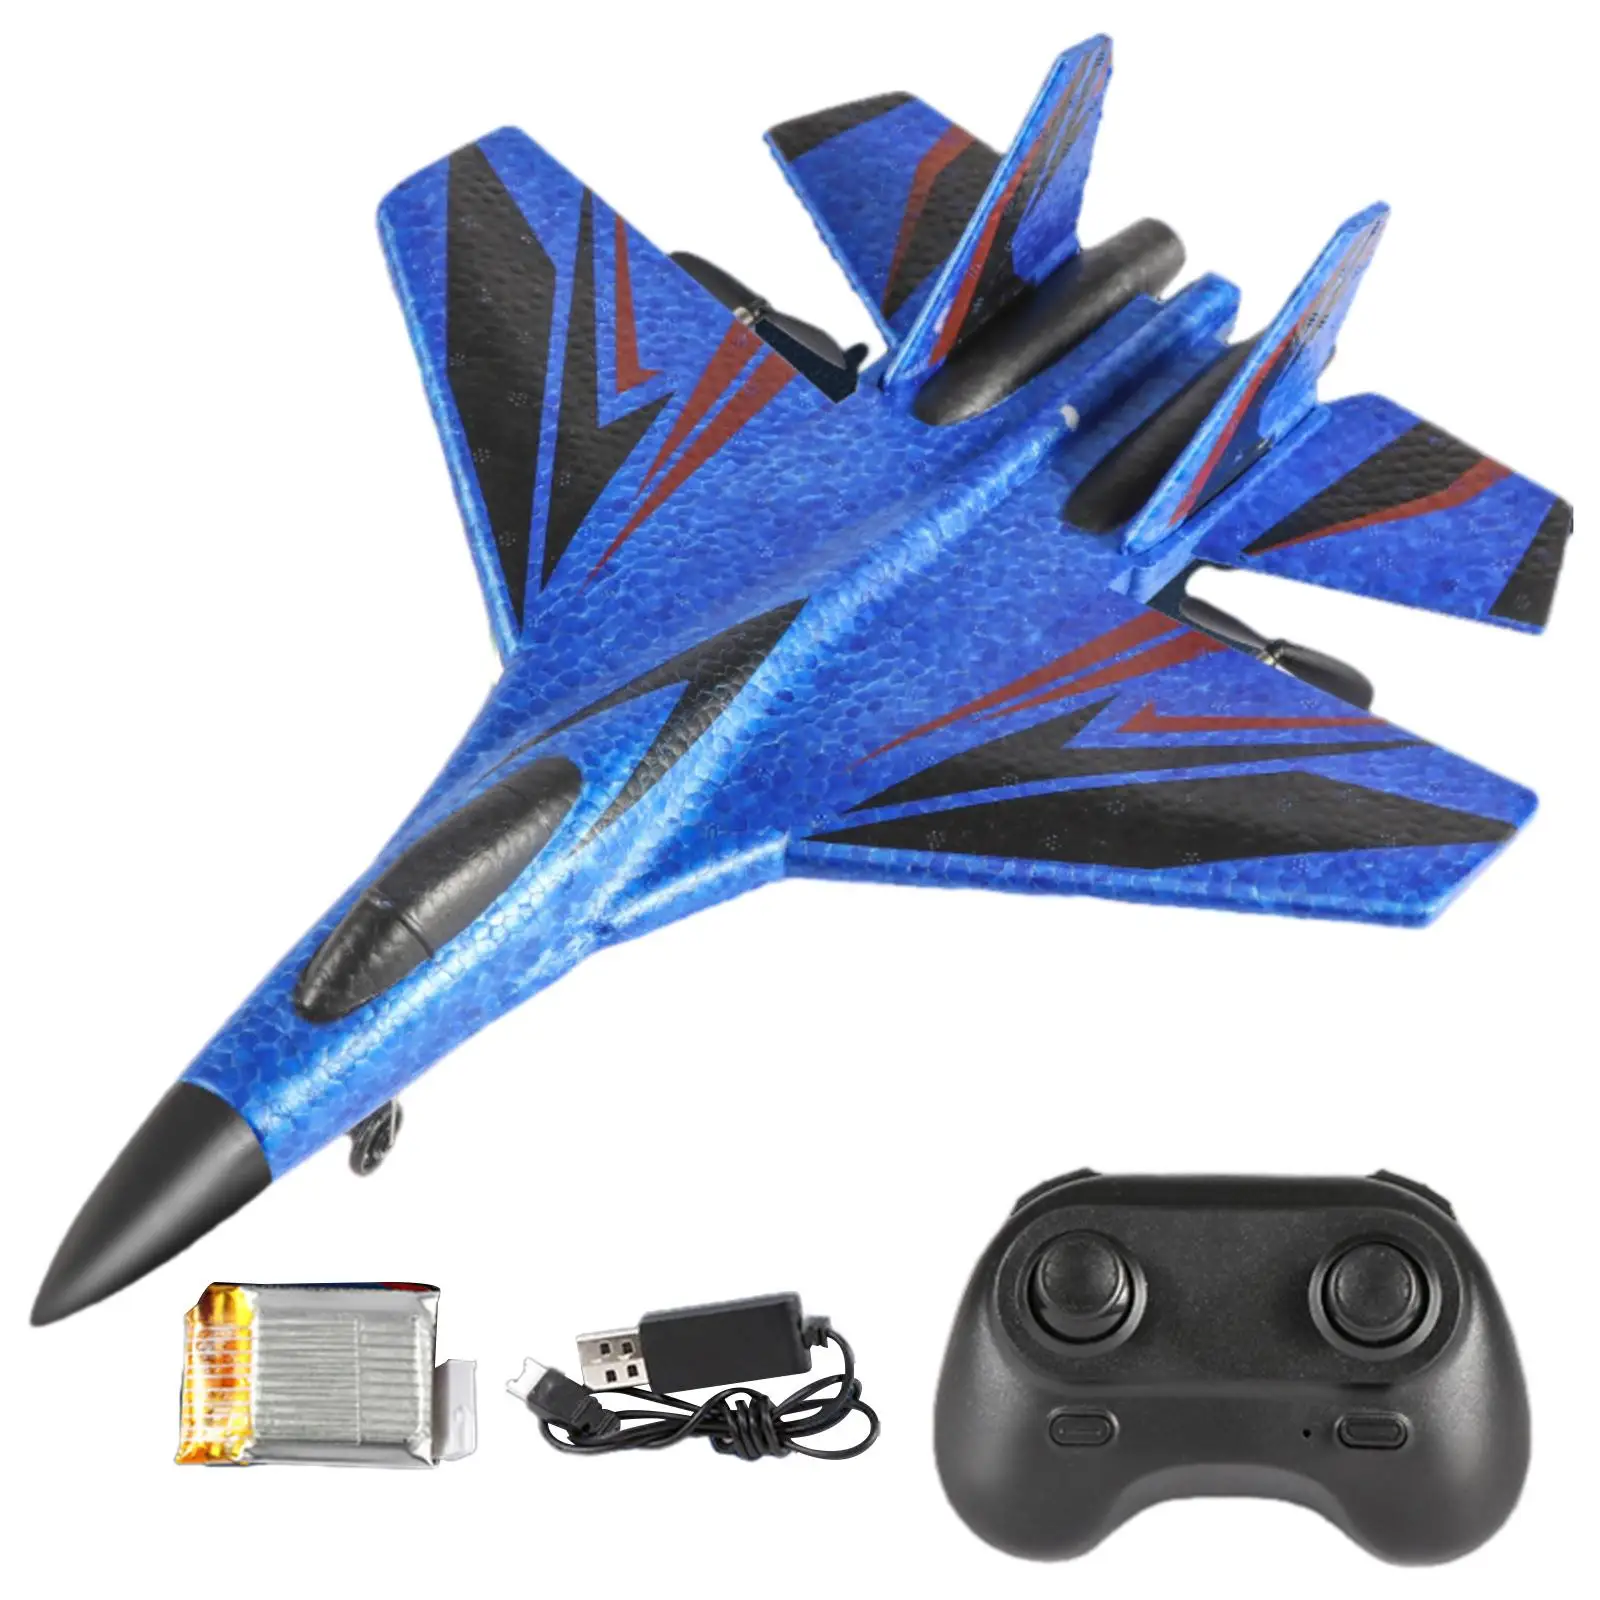 Jet Fighter Toys SU30 Aircraft Model Toys Lightweight Glider Fighter Toys Easy to Control Foam RC Glider for Kids Birthday Gifts